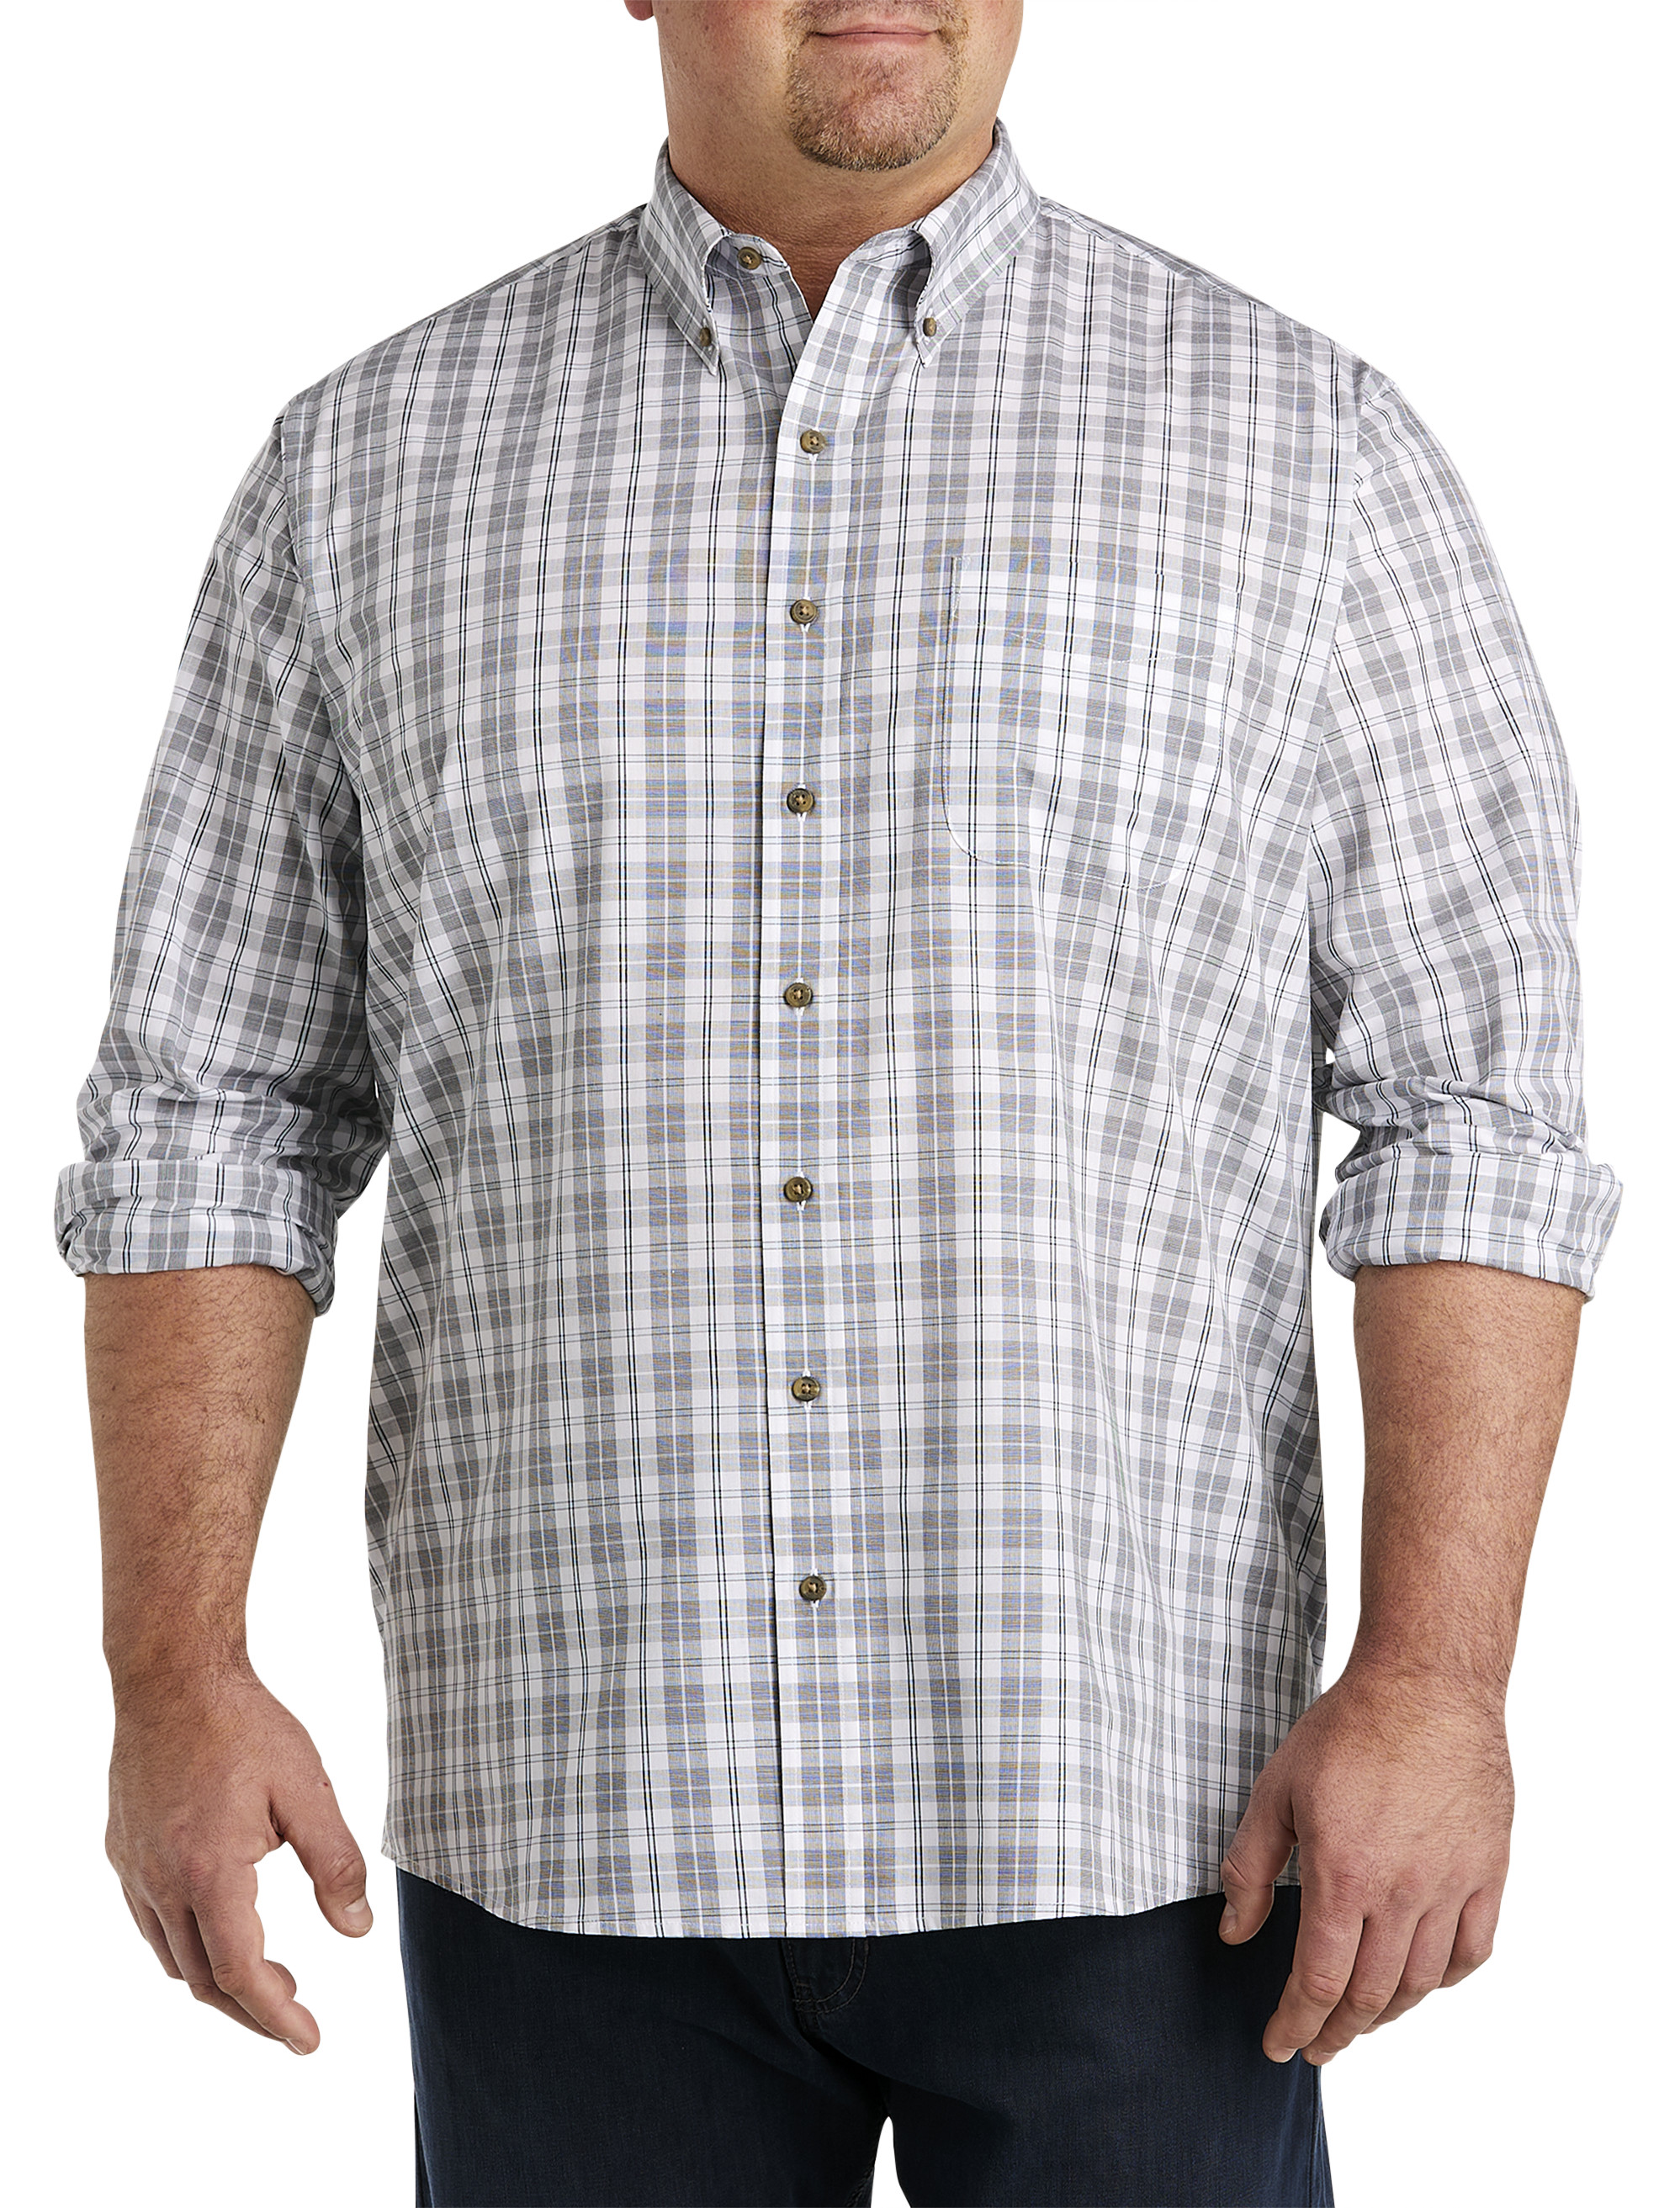 Stylish Cotton Blend Checked Long Sleeves Casual Shirt For Men